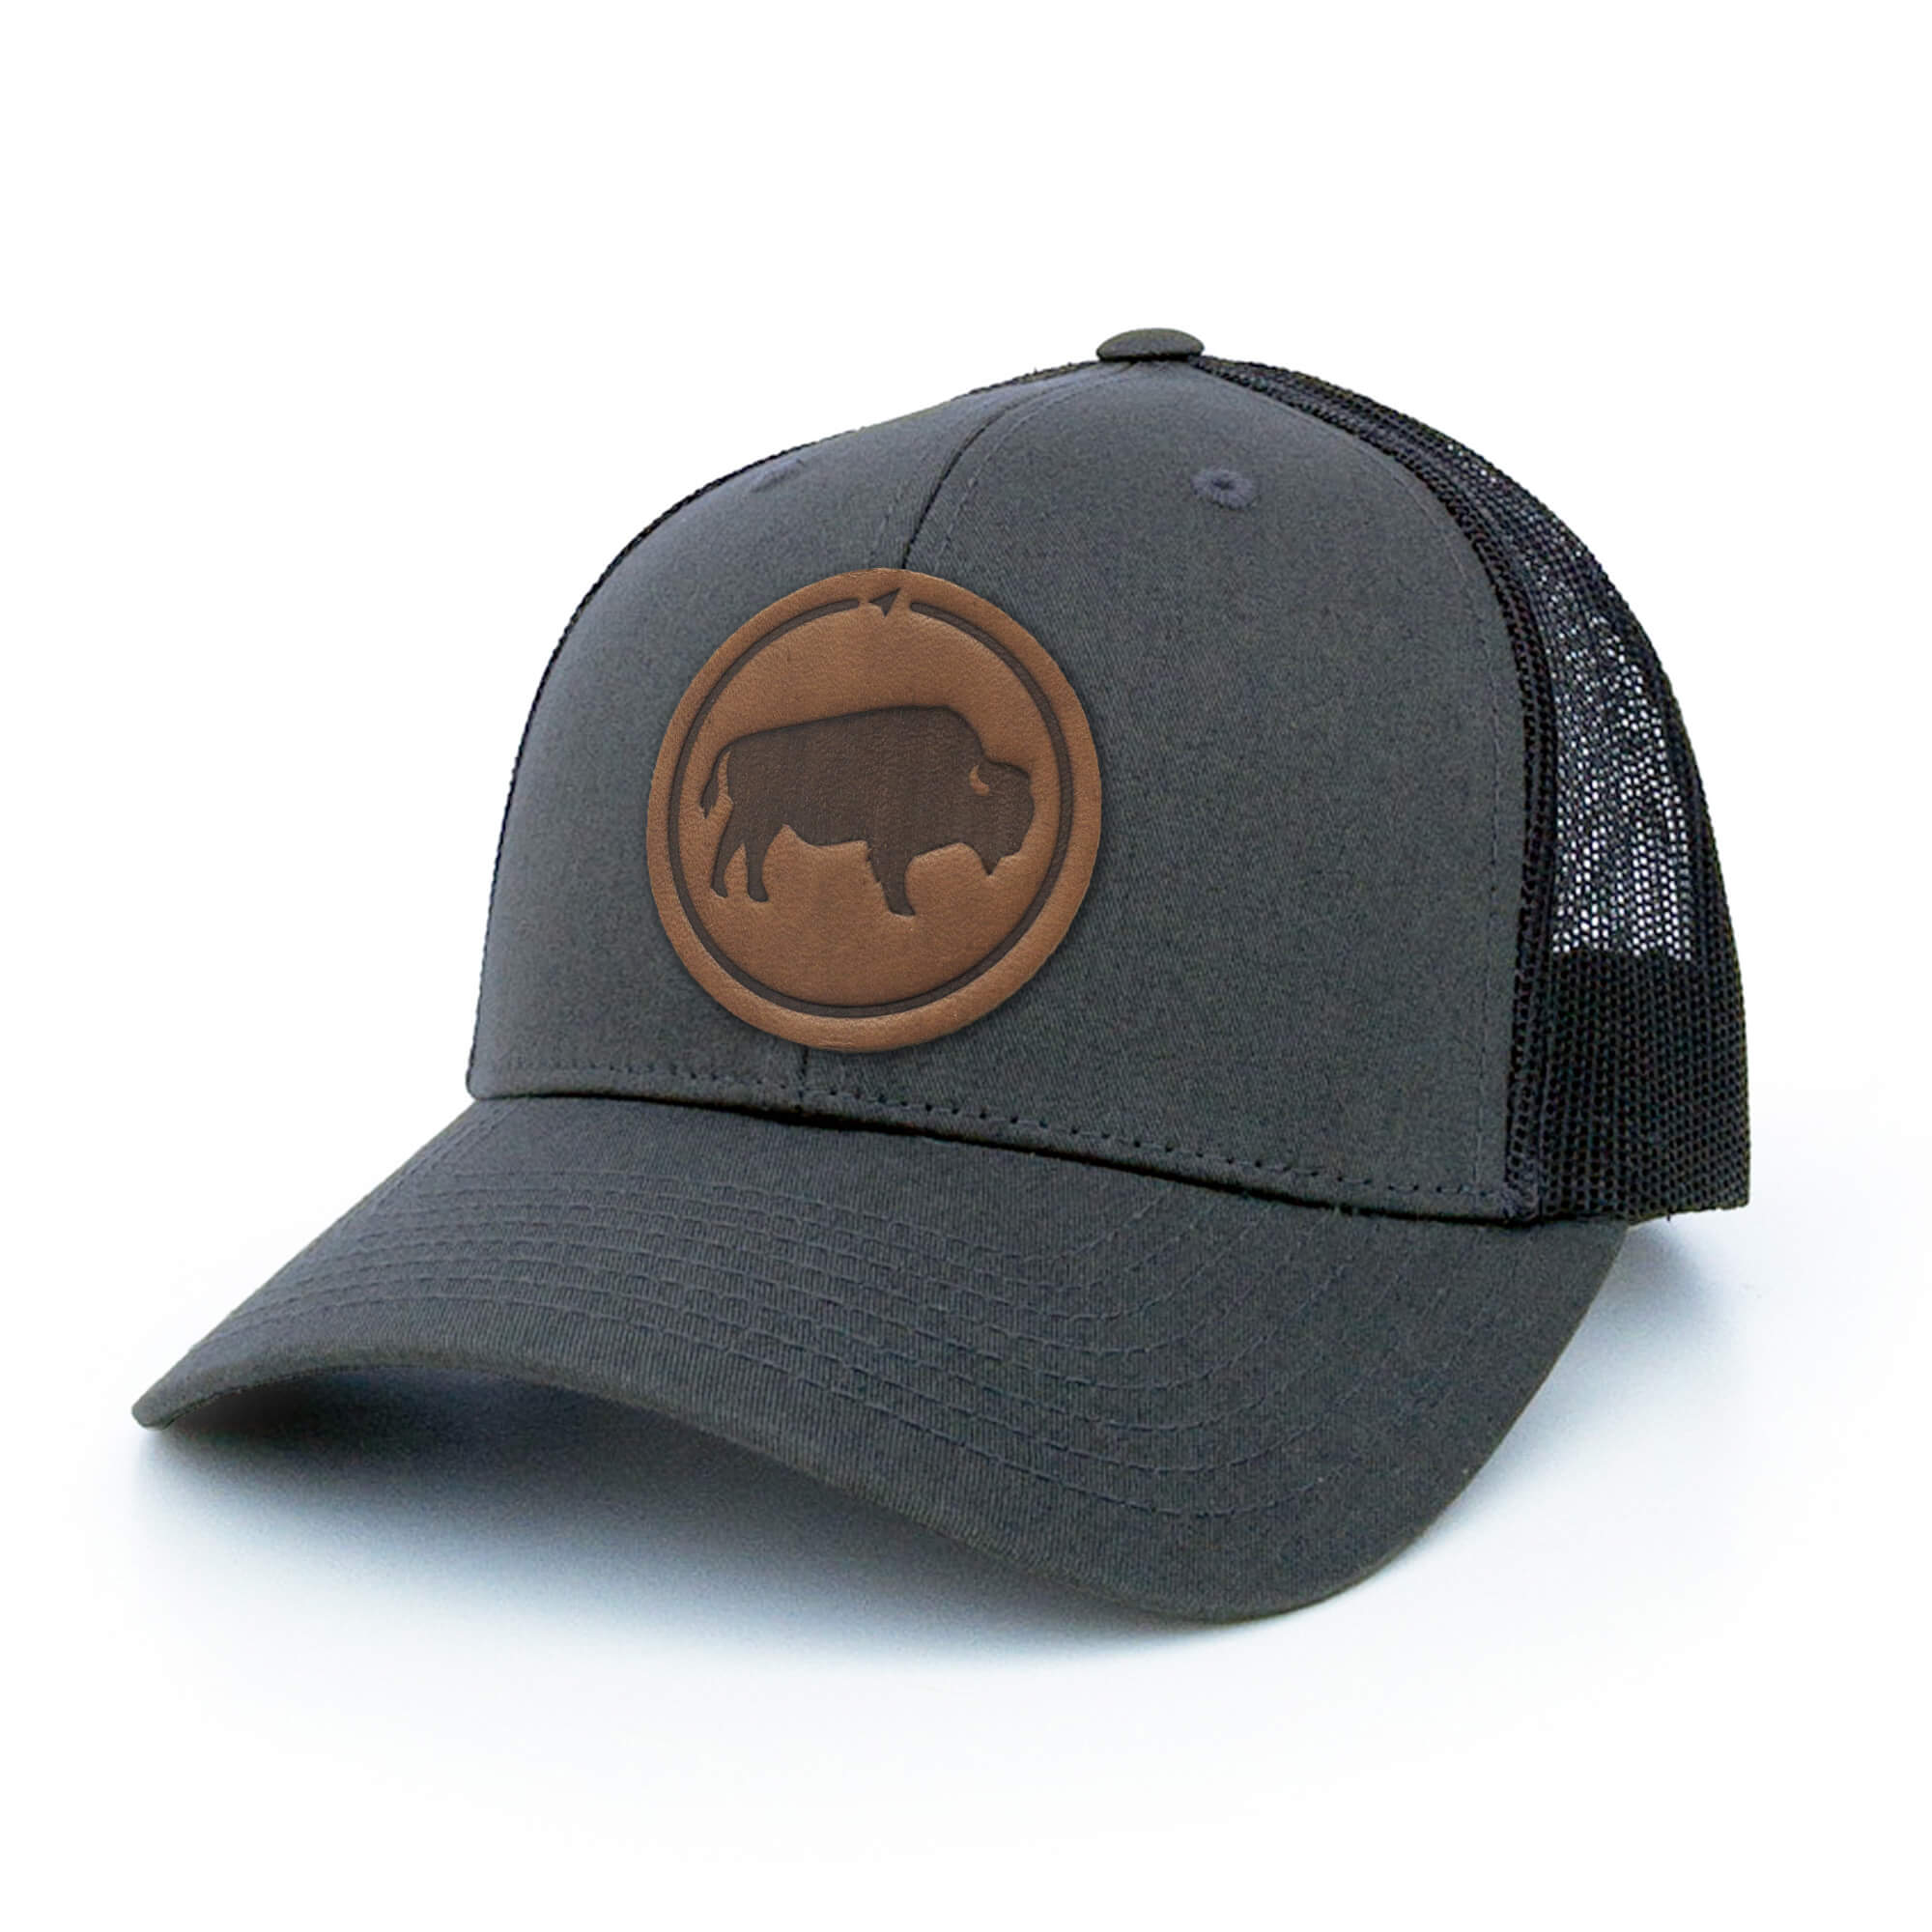 Charcoal trucker hat with full-grain leather patch of Bison | BLACK-004-010, CHARC-004-010, NAVY-004-010, HGREY-004-010, MOSS-004-010, BROWN-004-010